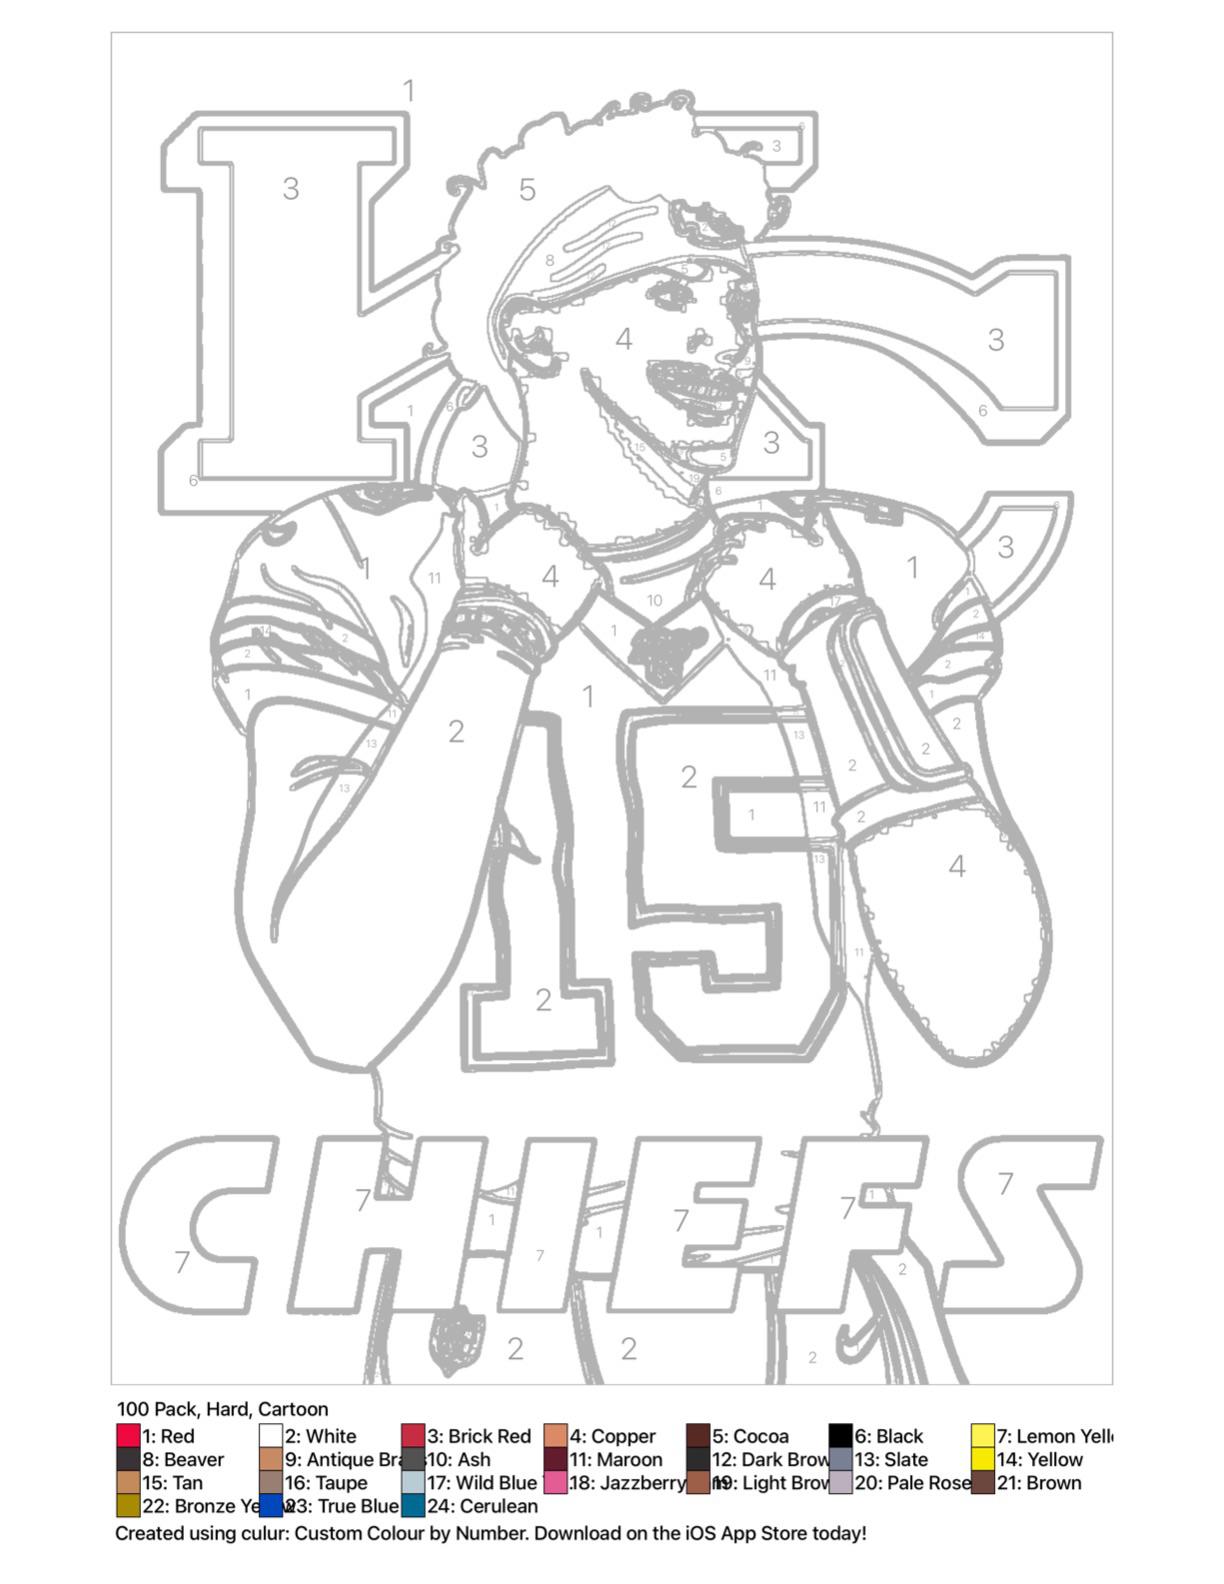 Mahomes cartoon color by number rkansascitychiefs